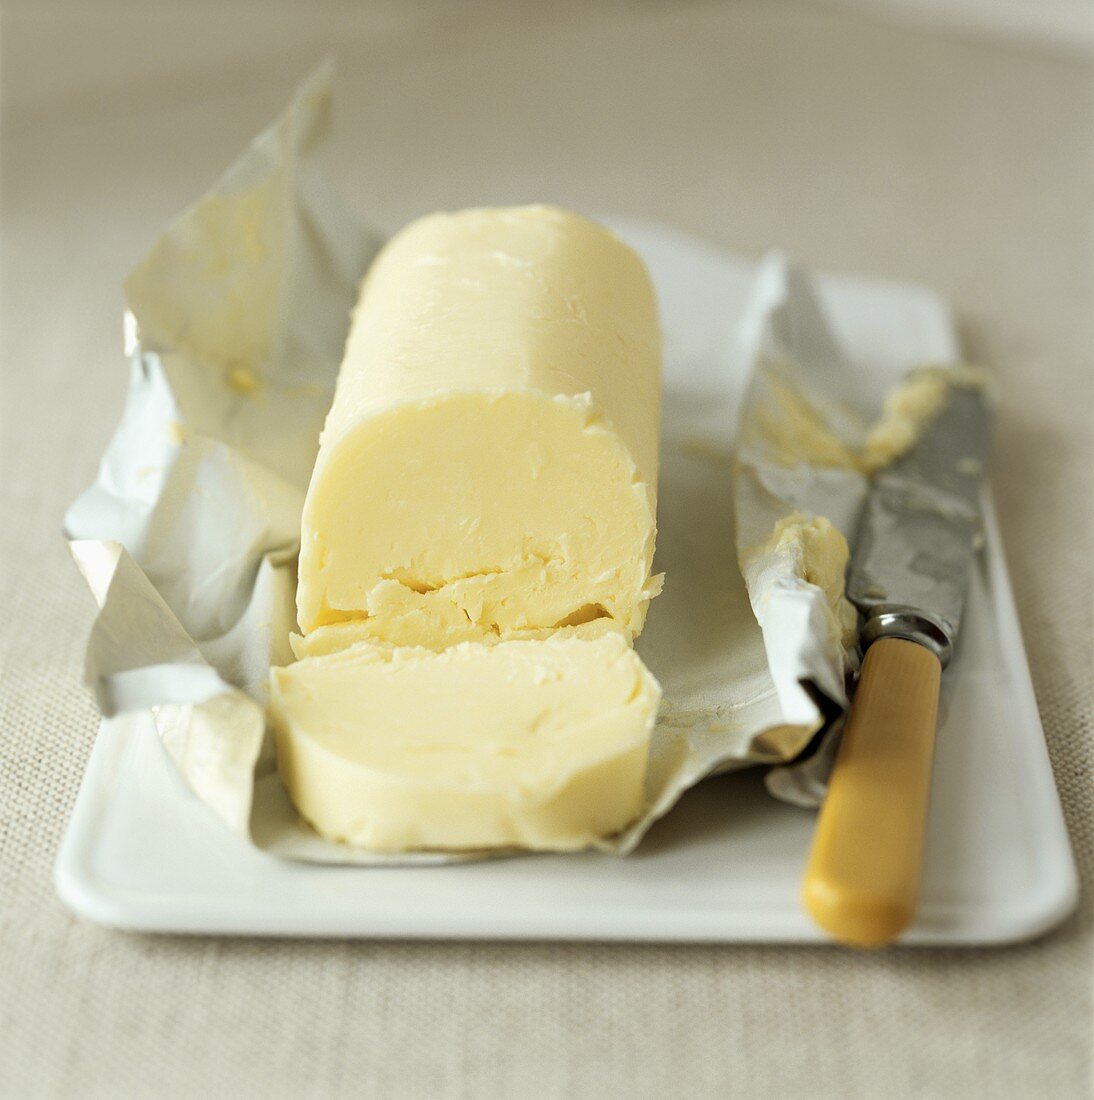 Butter with knife on paper